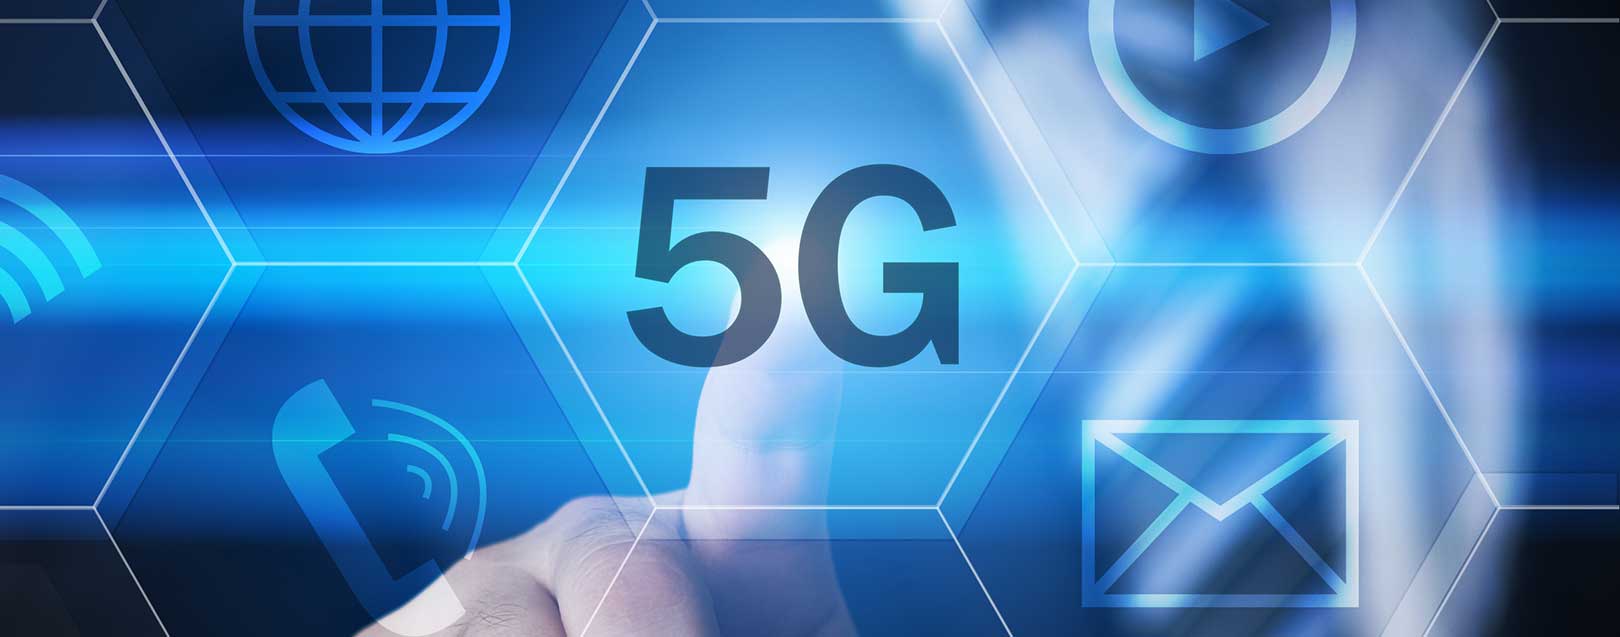 Spectrum policy for roll out of 5G  in India underway